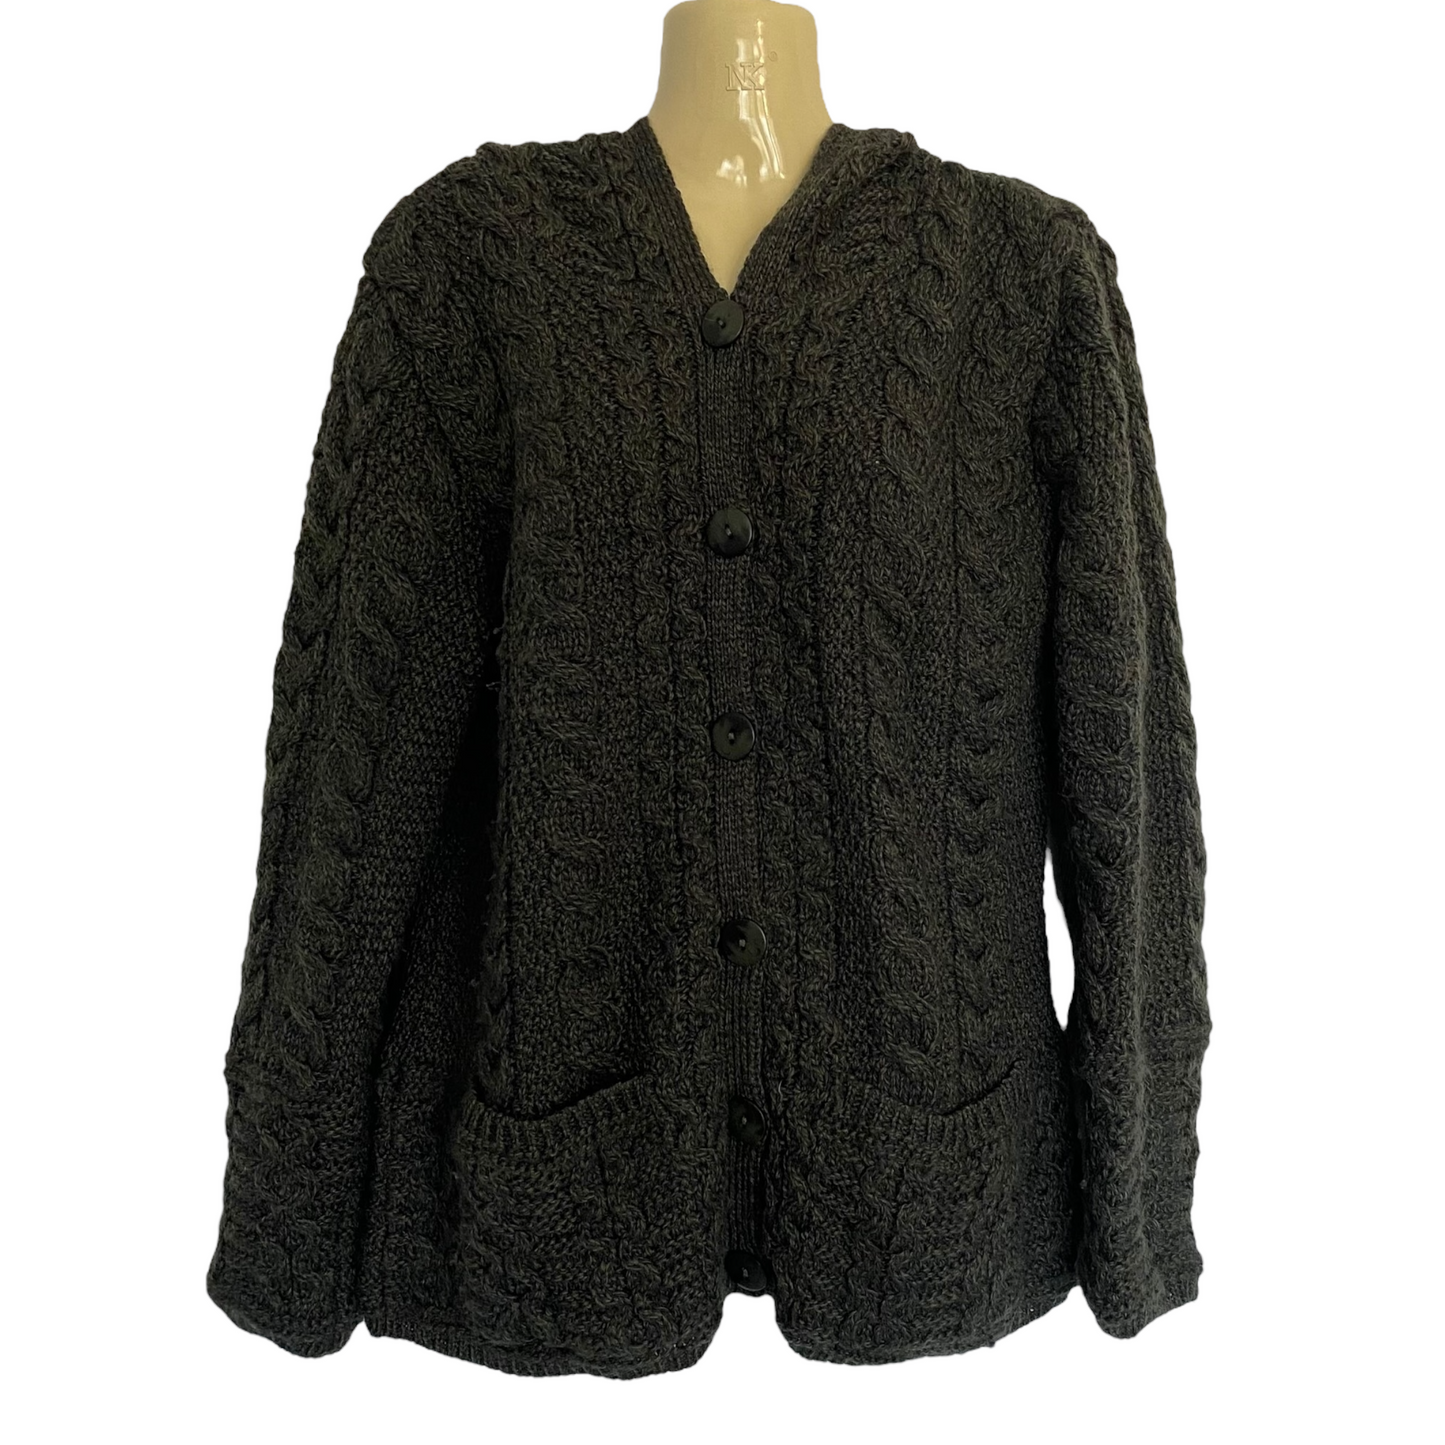 Aran Mor Hooded Cable Knit Cardigan Size M